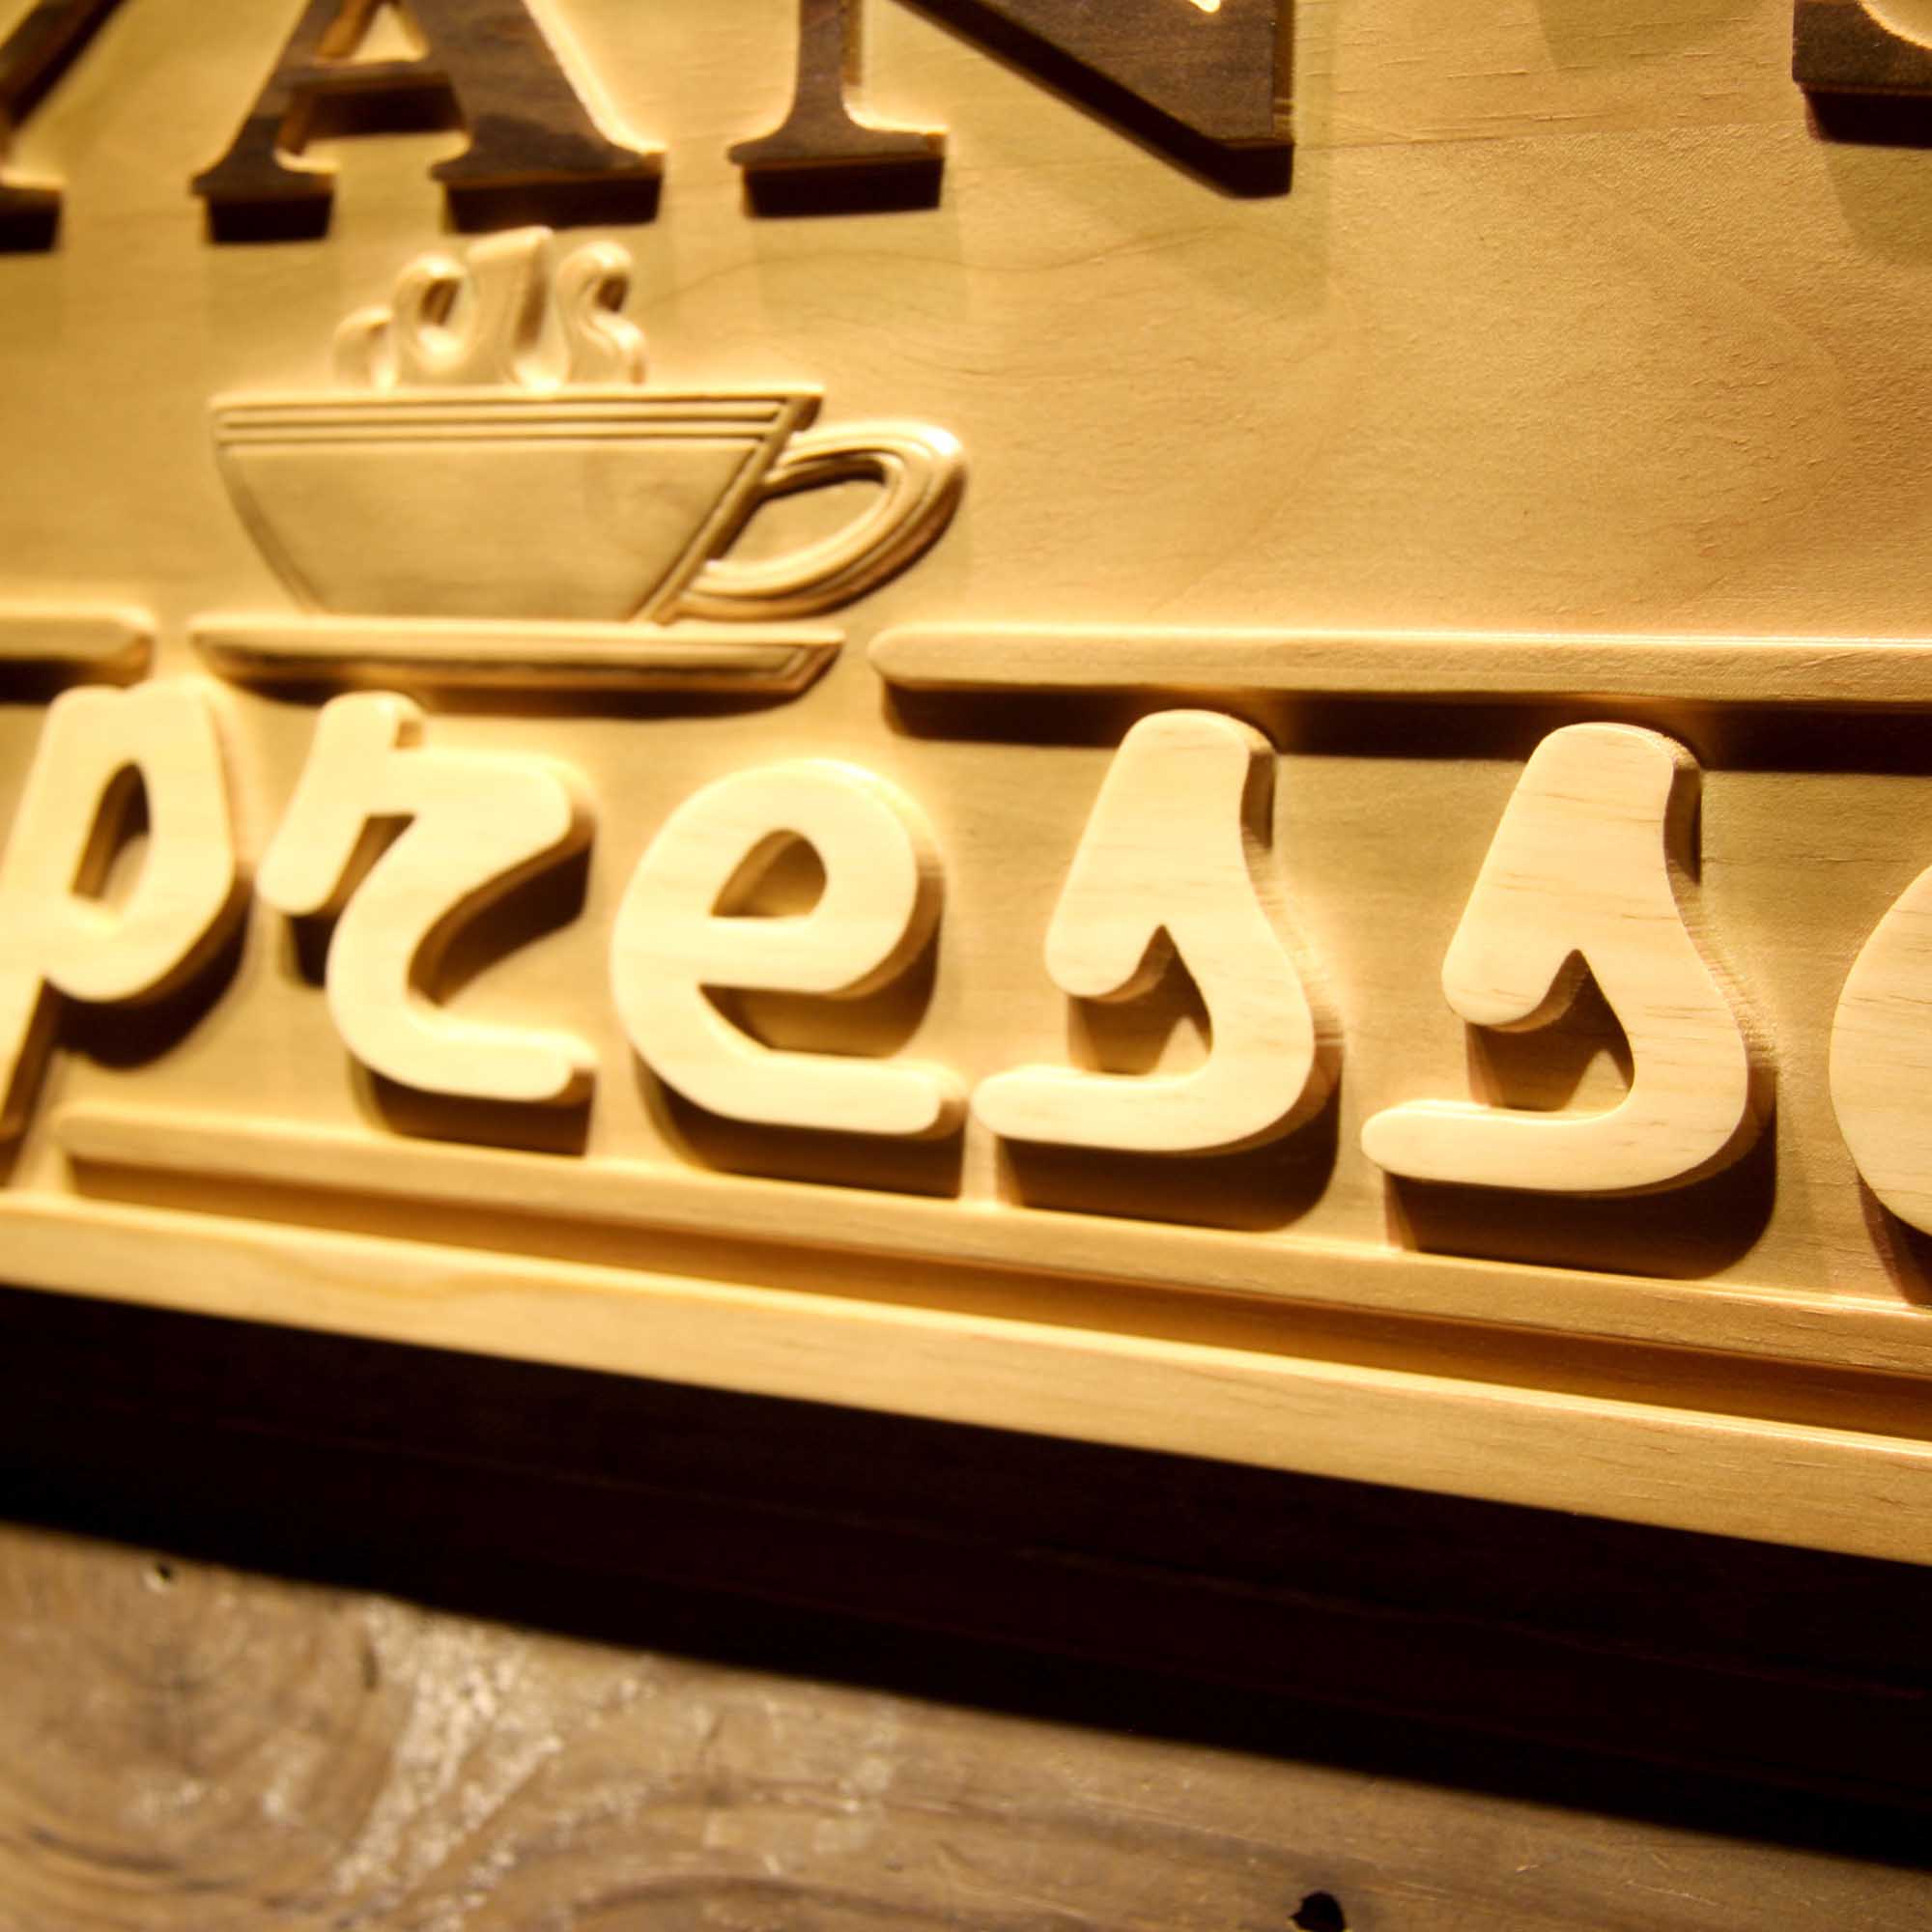 Personalized Espresso Coffee Shop Kitchen Housewarming Gifts Wood Engraved Wooden Sign